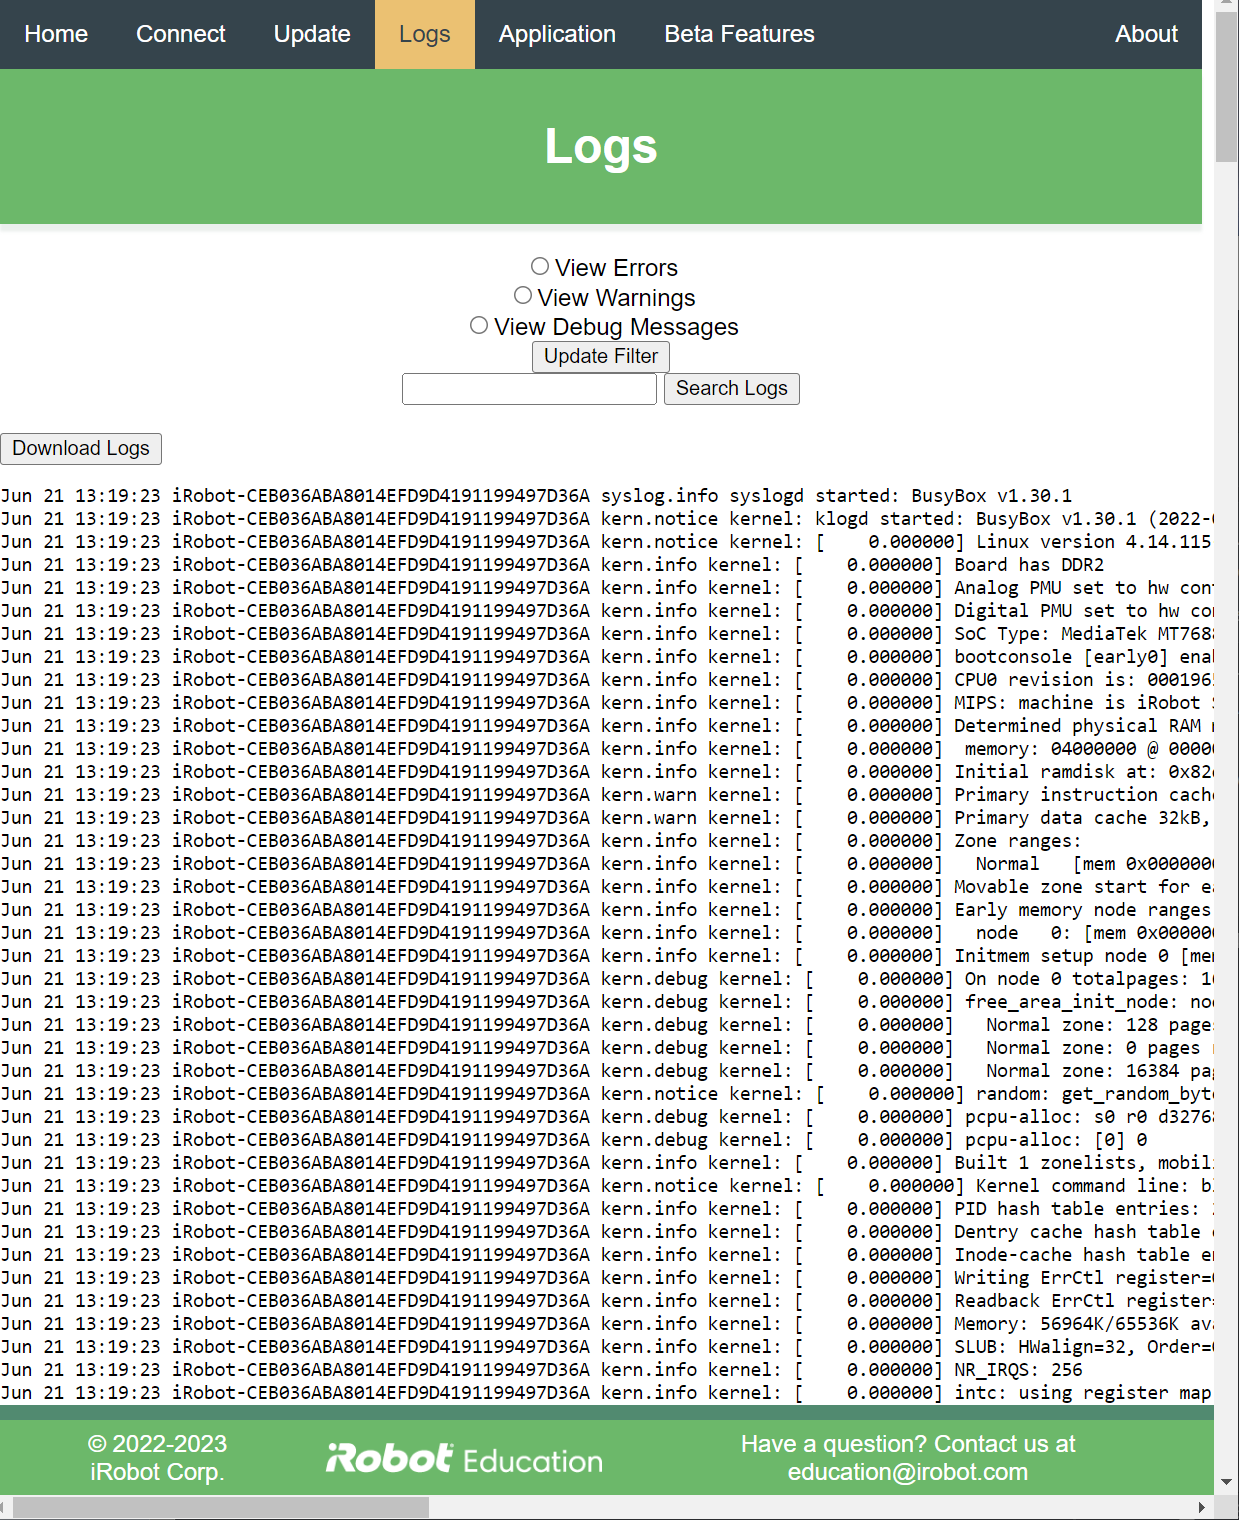 Picture of logs page